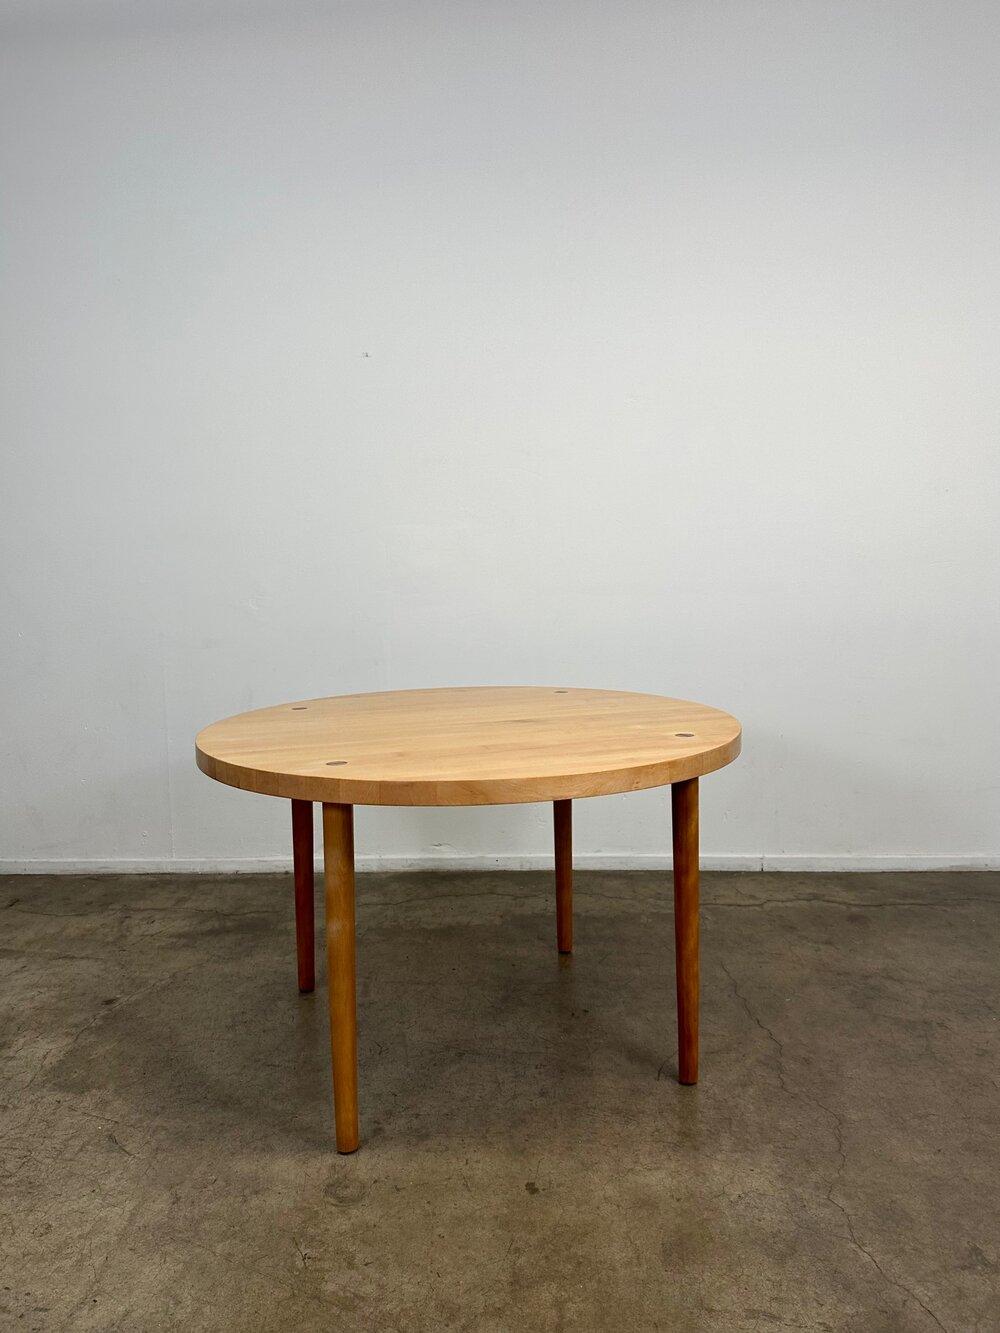 Measures: W48 H29.5. Knee clearance 27.

Solid maple dining table circa 1960s designed by Claud Bunyard for Design Research. Item offers high quality materials with a minimalistic design. Very subtle inset rosewood on surface adds both a flair of